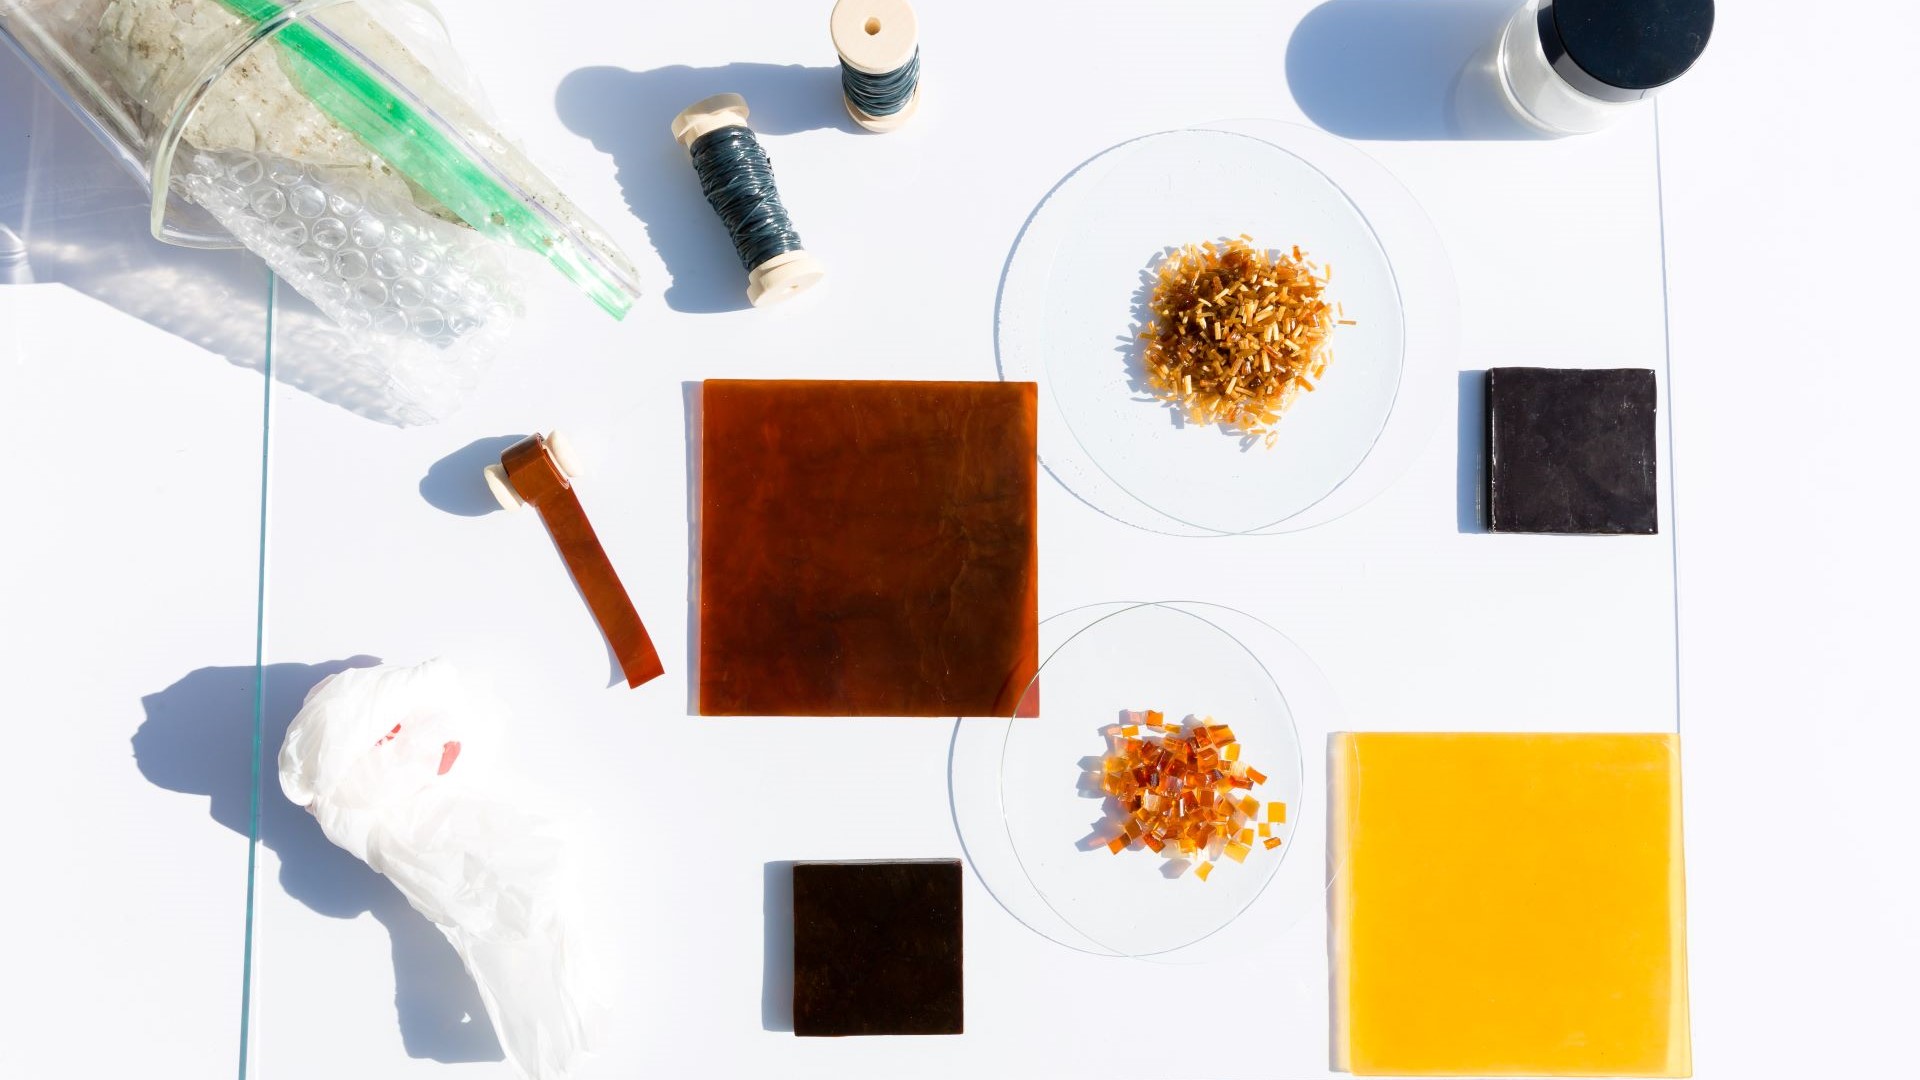 Can upcycling plastic waste rival the quality of virgin materials? Interview with Novoloop